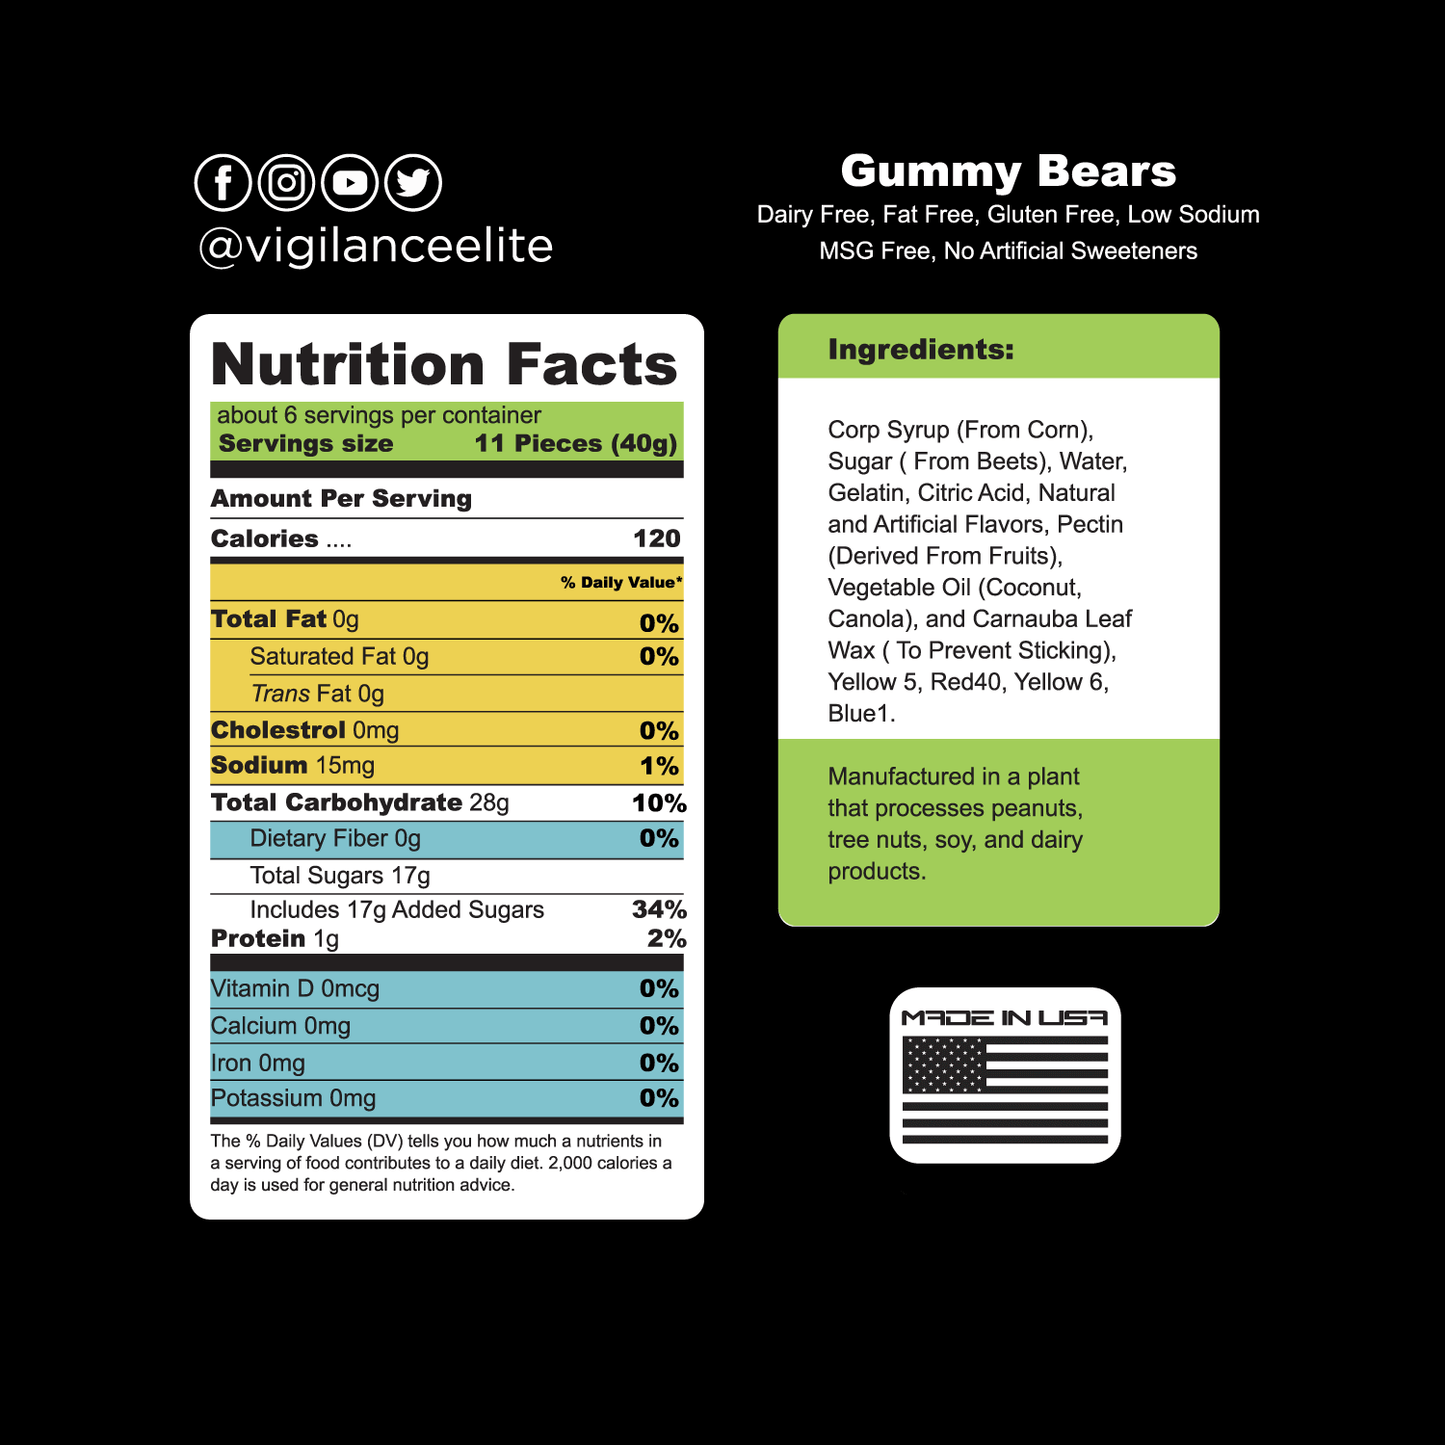 Nutrition facts for gummy bears